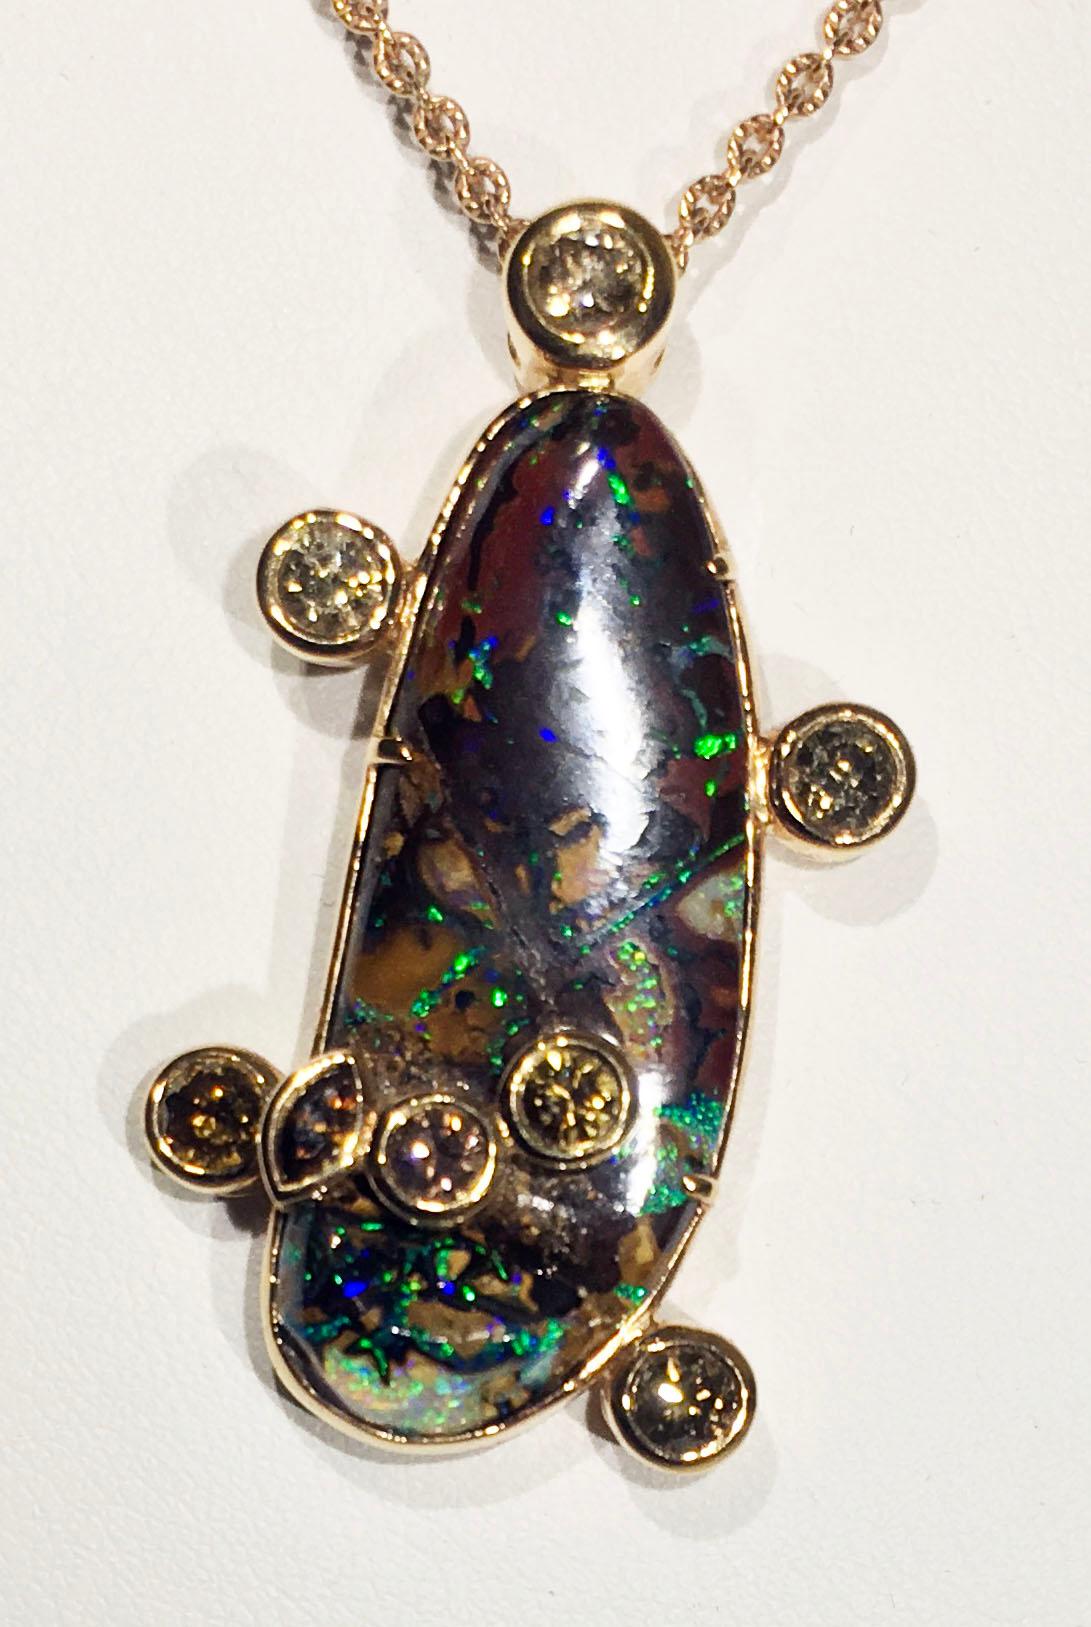 Kary Adam Designed, 18kt Rose Gold Pendant with Cognac Diamonds & Australian Boulder Opal.
This Pendant is 1 1/8” long by 1” wide and hangs on a 20 Inch Rose Gold Chain with a Lobster Claw Clasp.
18kt Rose Gold Weight 13 Grams (not Including Chain),